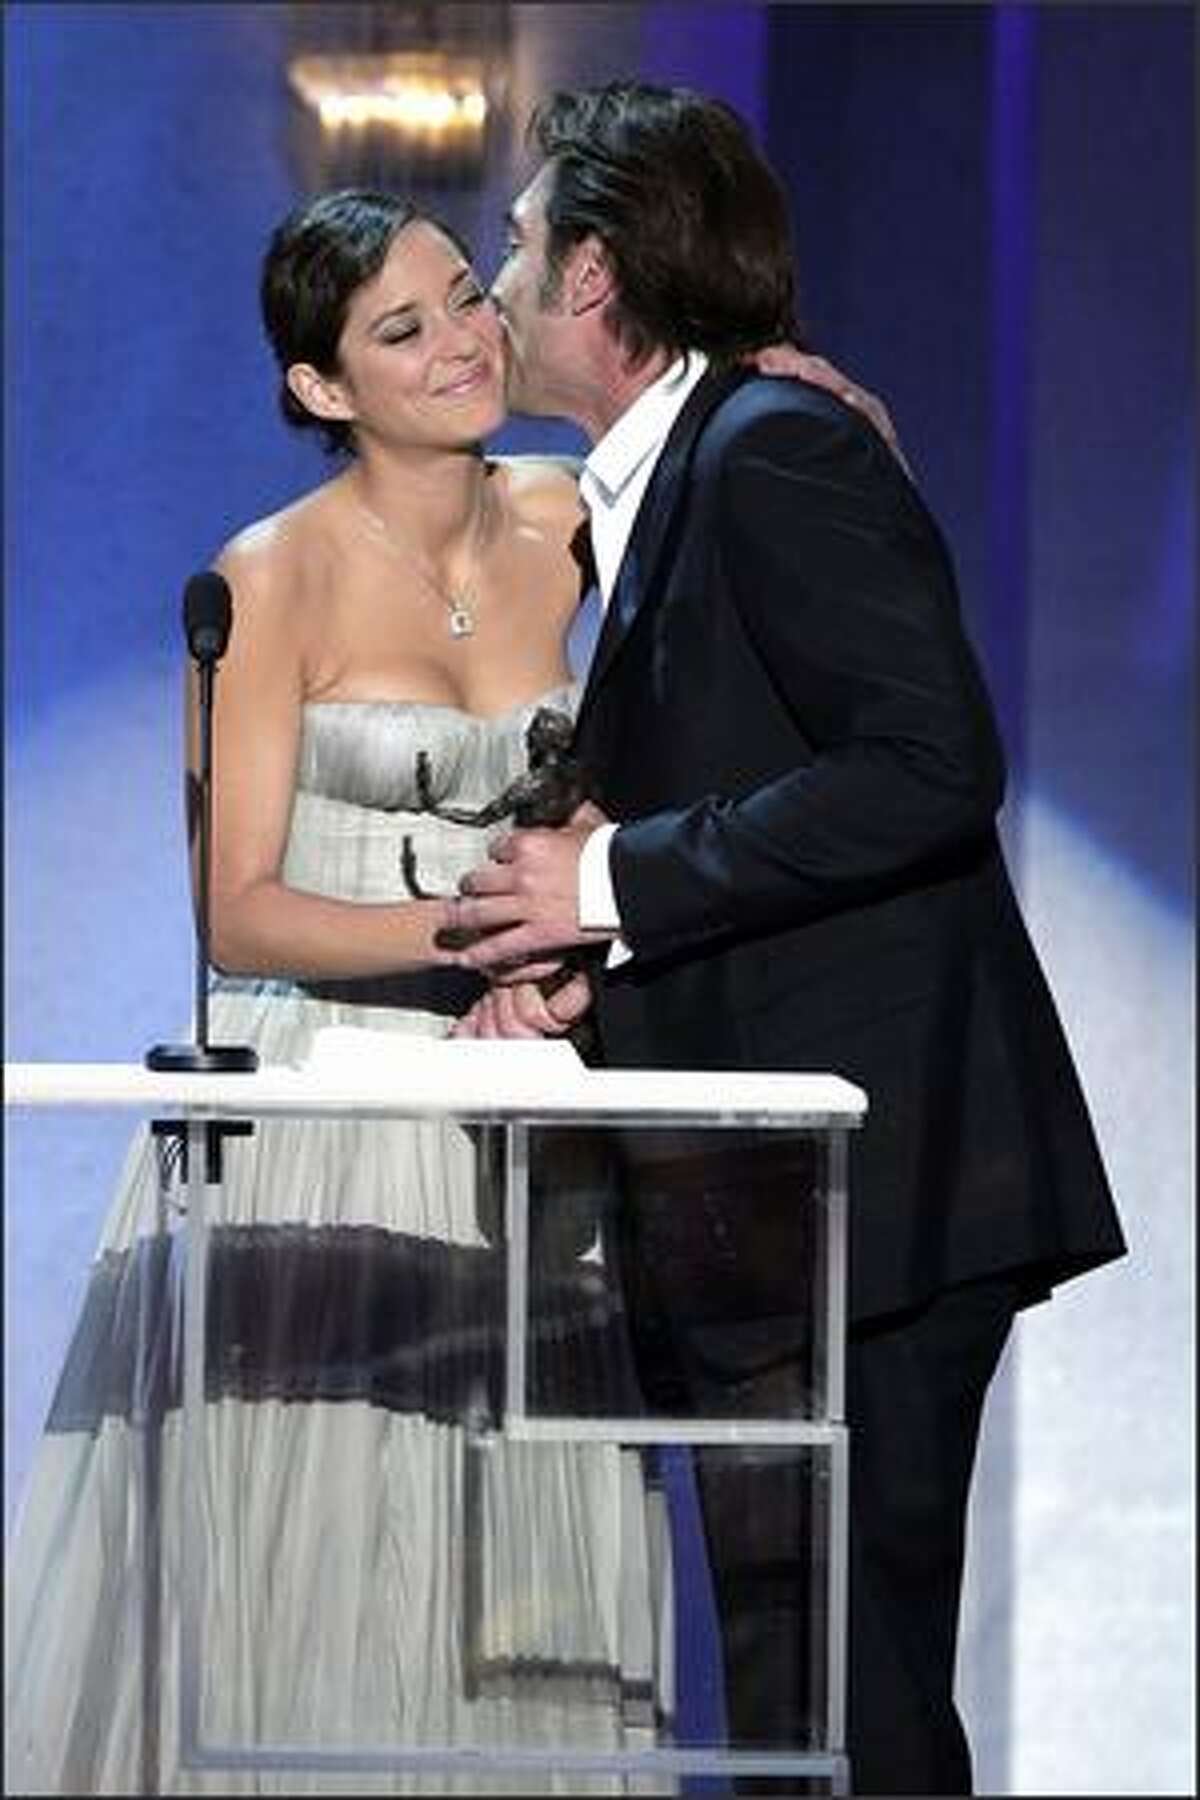 Javier Bardem, right, kisses presenter Marion Cotillard as he accepts the award for outstanding performance by a male actor in a supporting role for "No Country For Old Men" during the 14th annual Screen Actors Guild Awards.